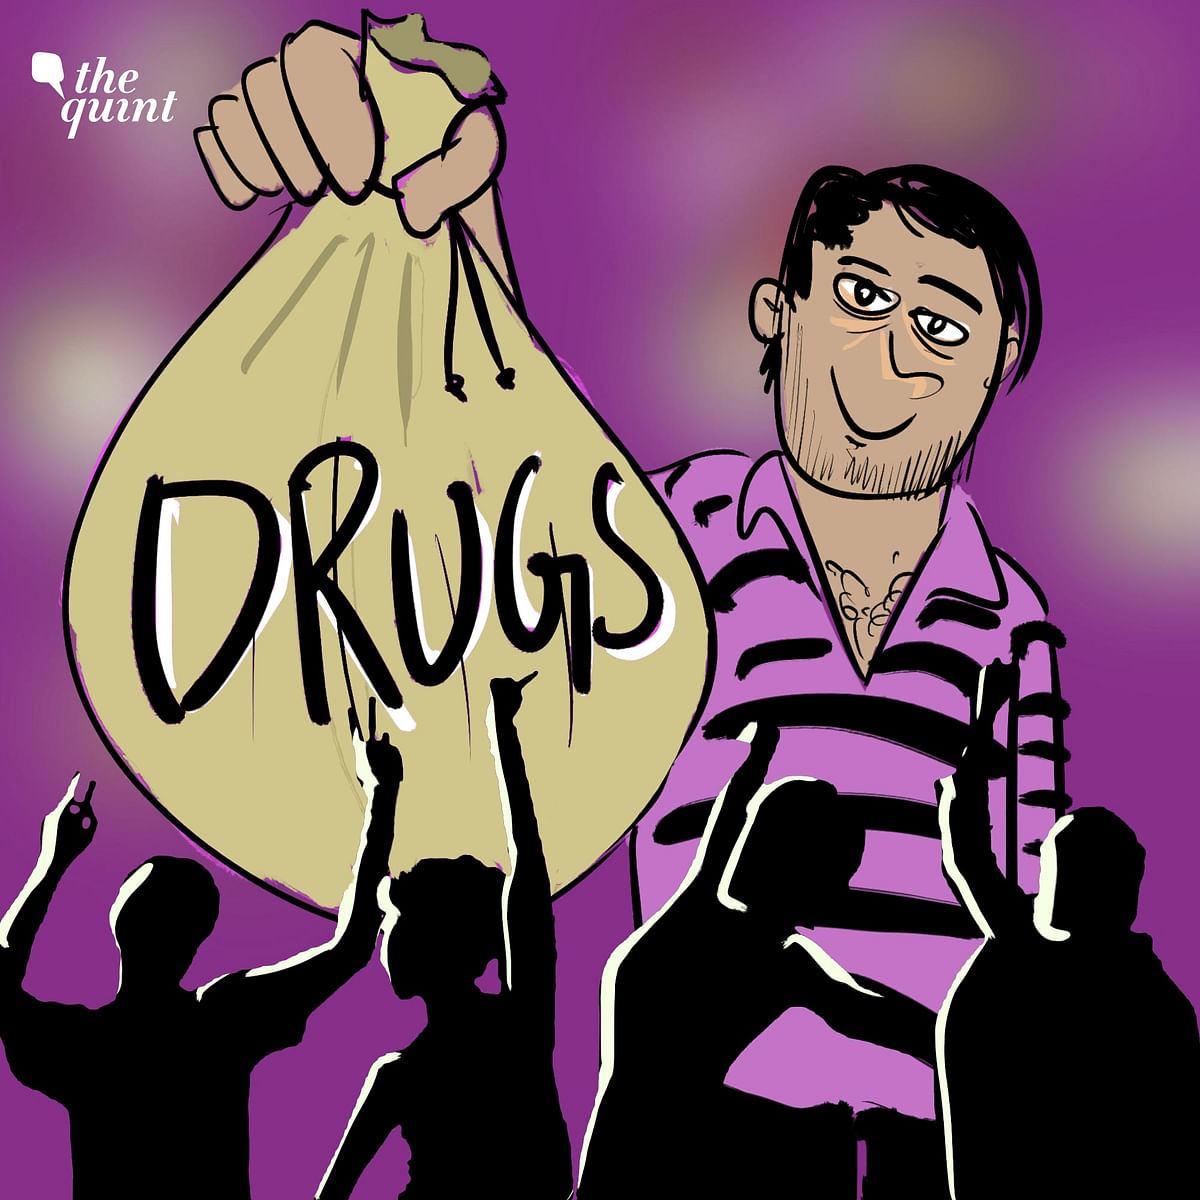 Psychotropic drugs, including tablets and injections, are circulated twice more than ganja, hashish and heroin.